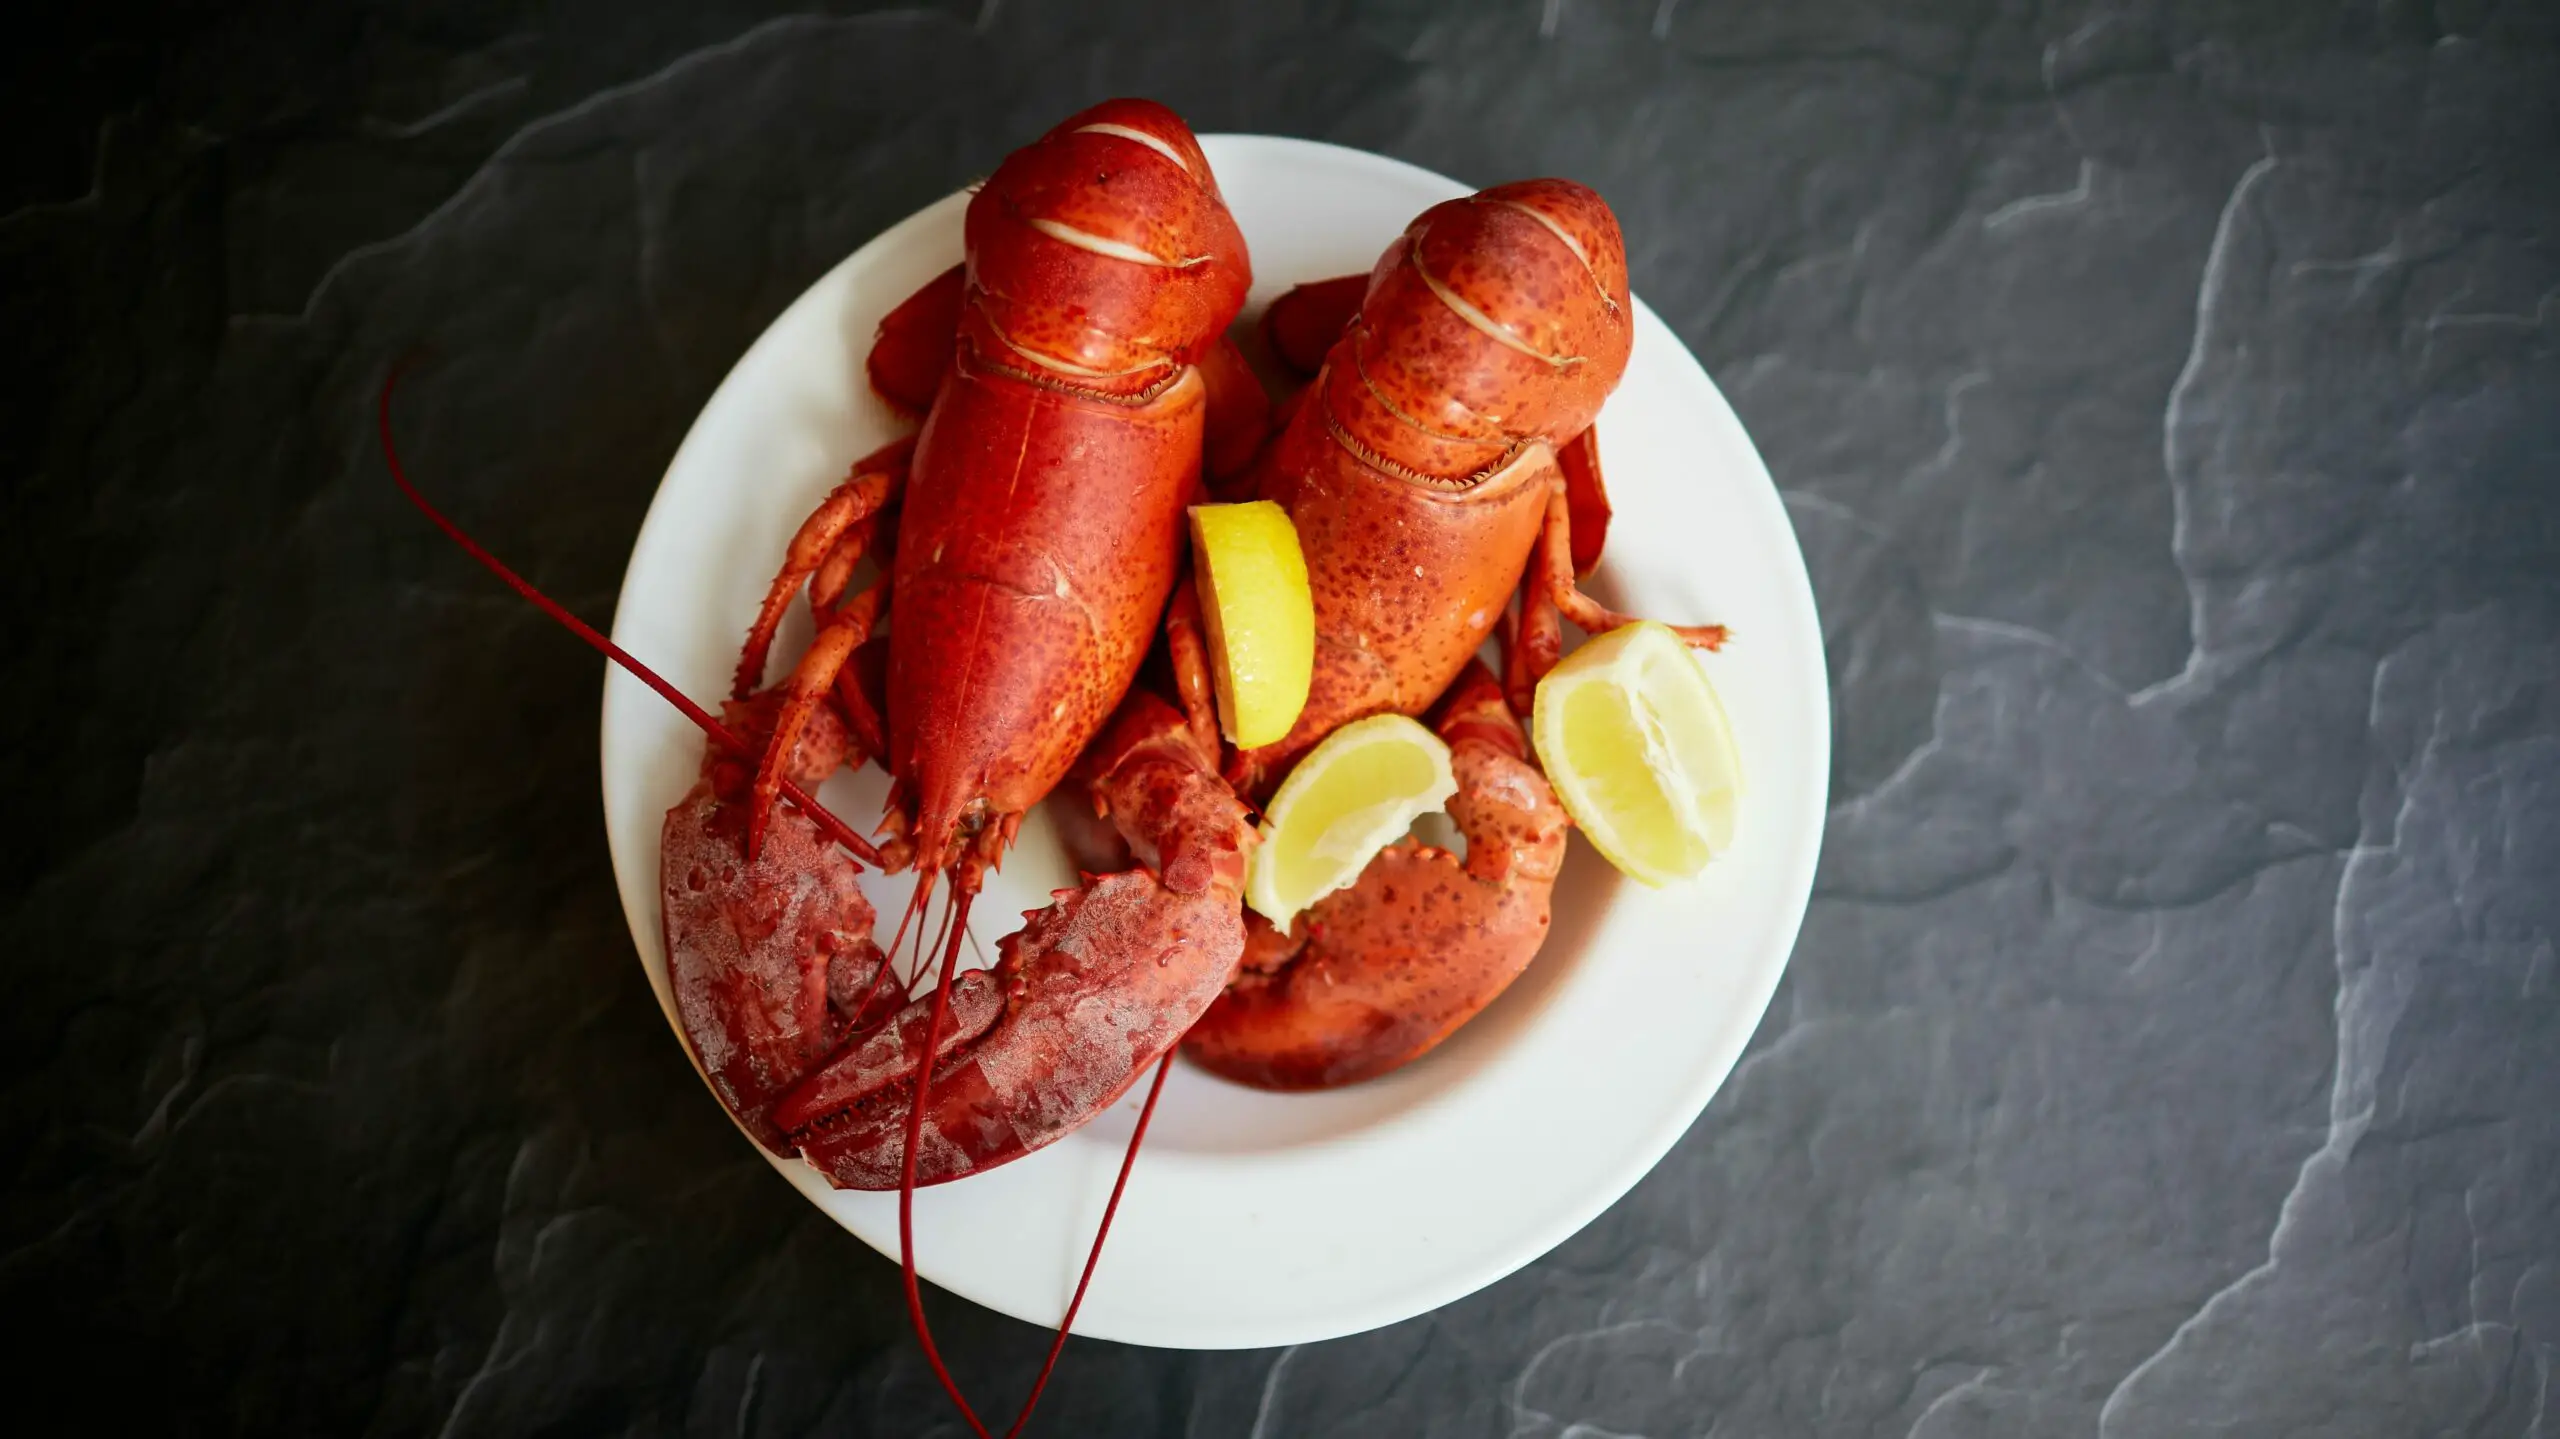 Do Lobsters Scream When You Boil Them?